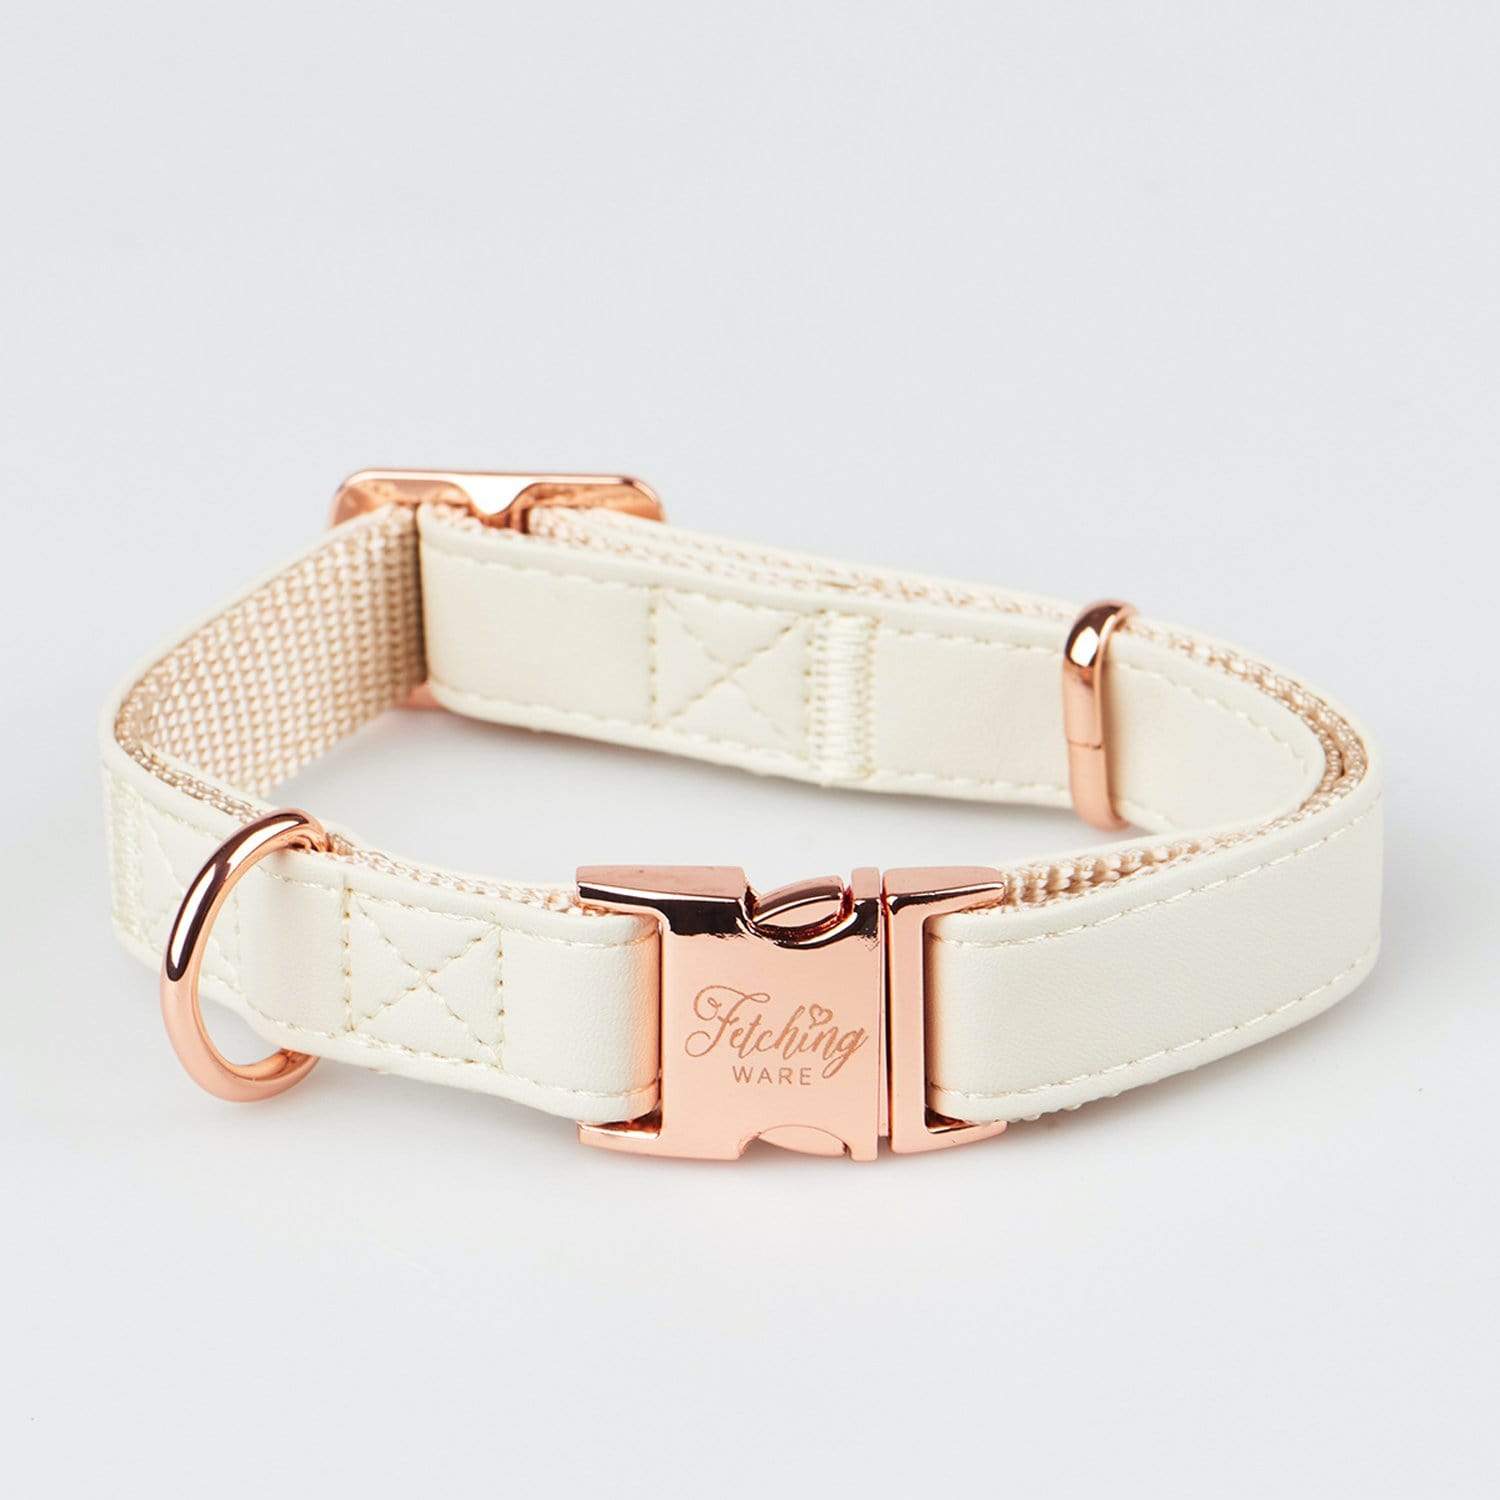 Fetching Ware Brayden in Rose Gold Dog Collars in White